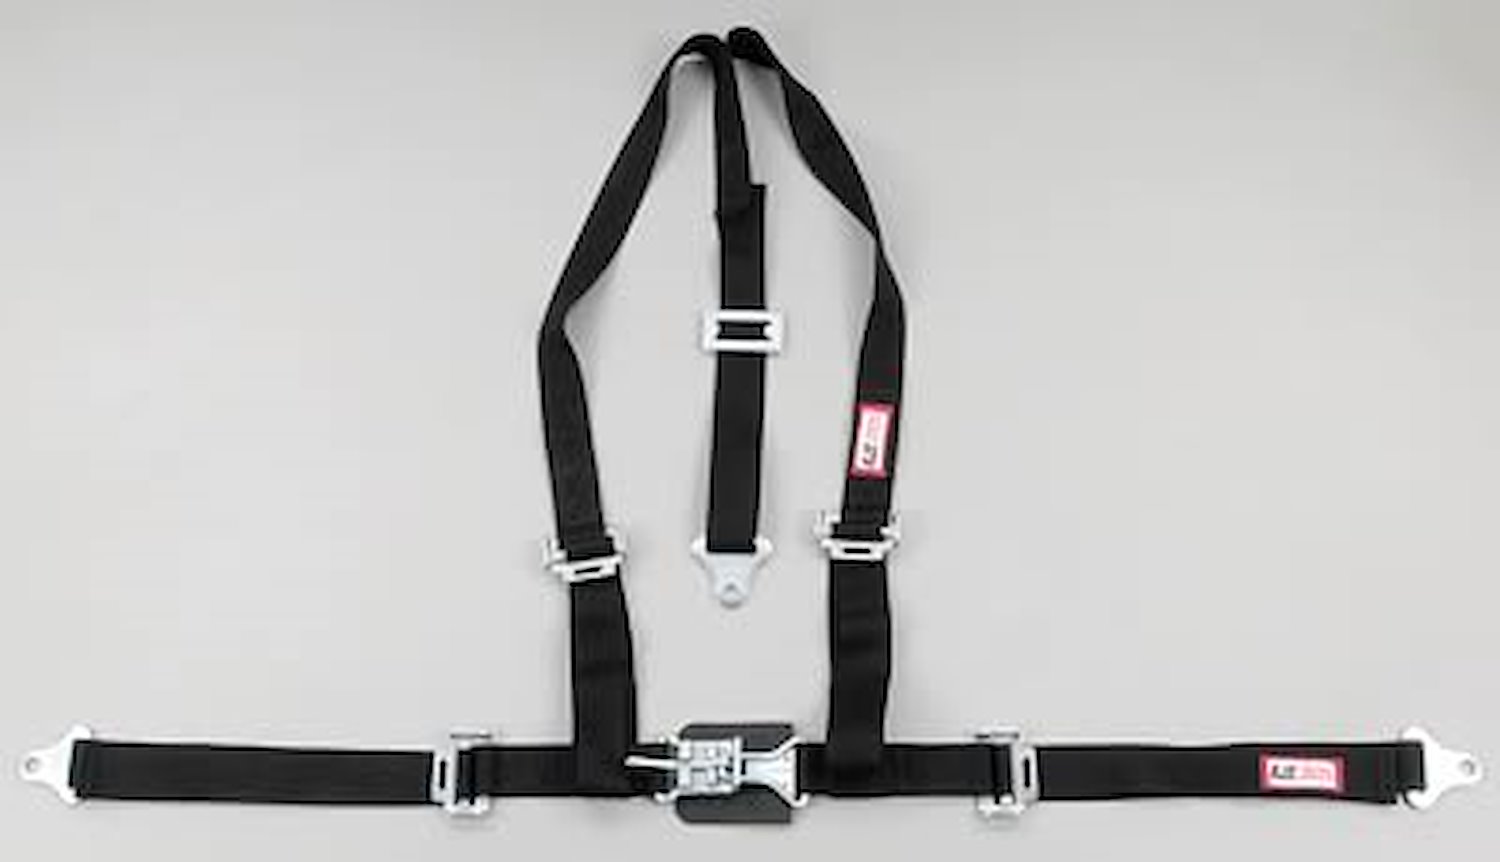 NON-SFI L&L HARNESS 2 PULL DOWN Lap Belt SNAP SEWN IN 2 S.H. Individual ROLL BAR Mount w/STERNUM STRAP WRAP/SNAP BLACK